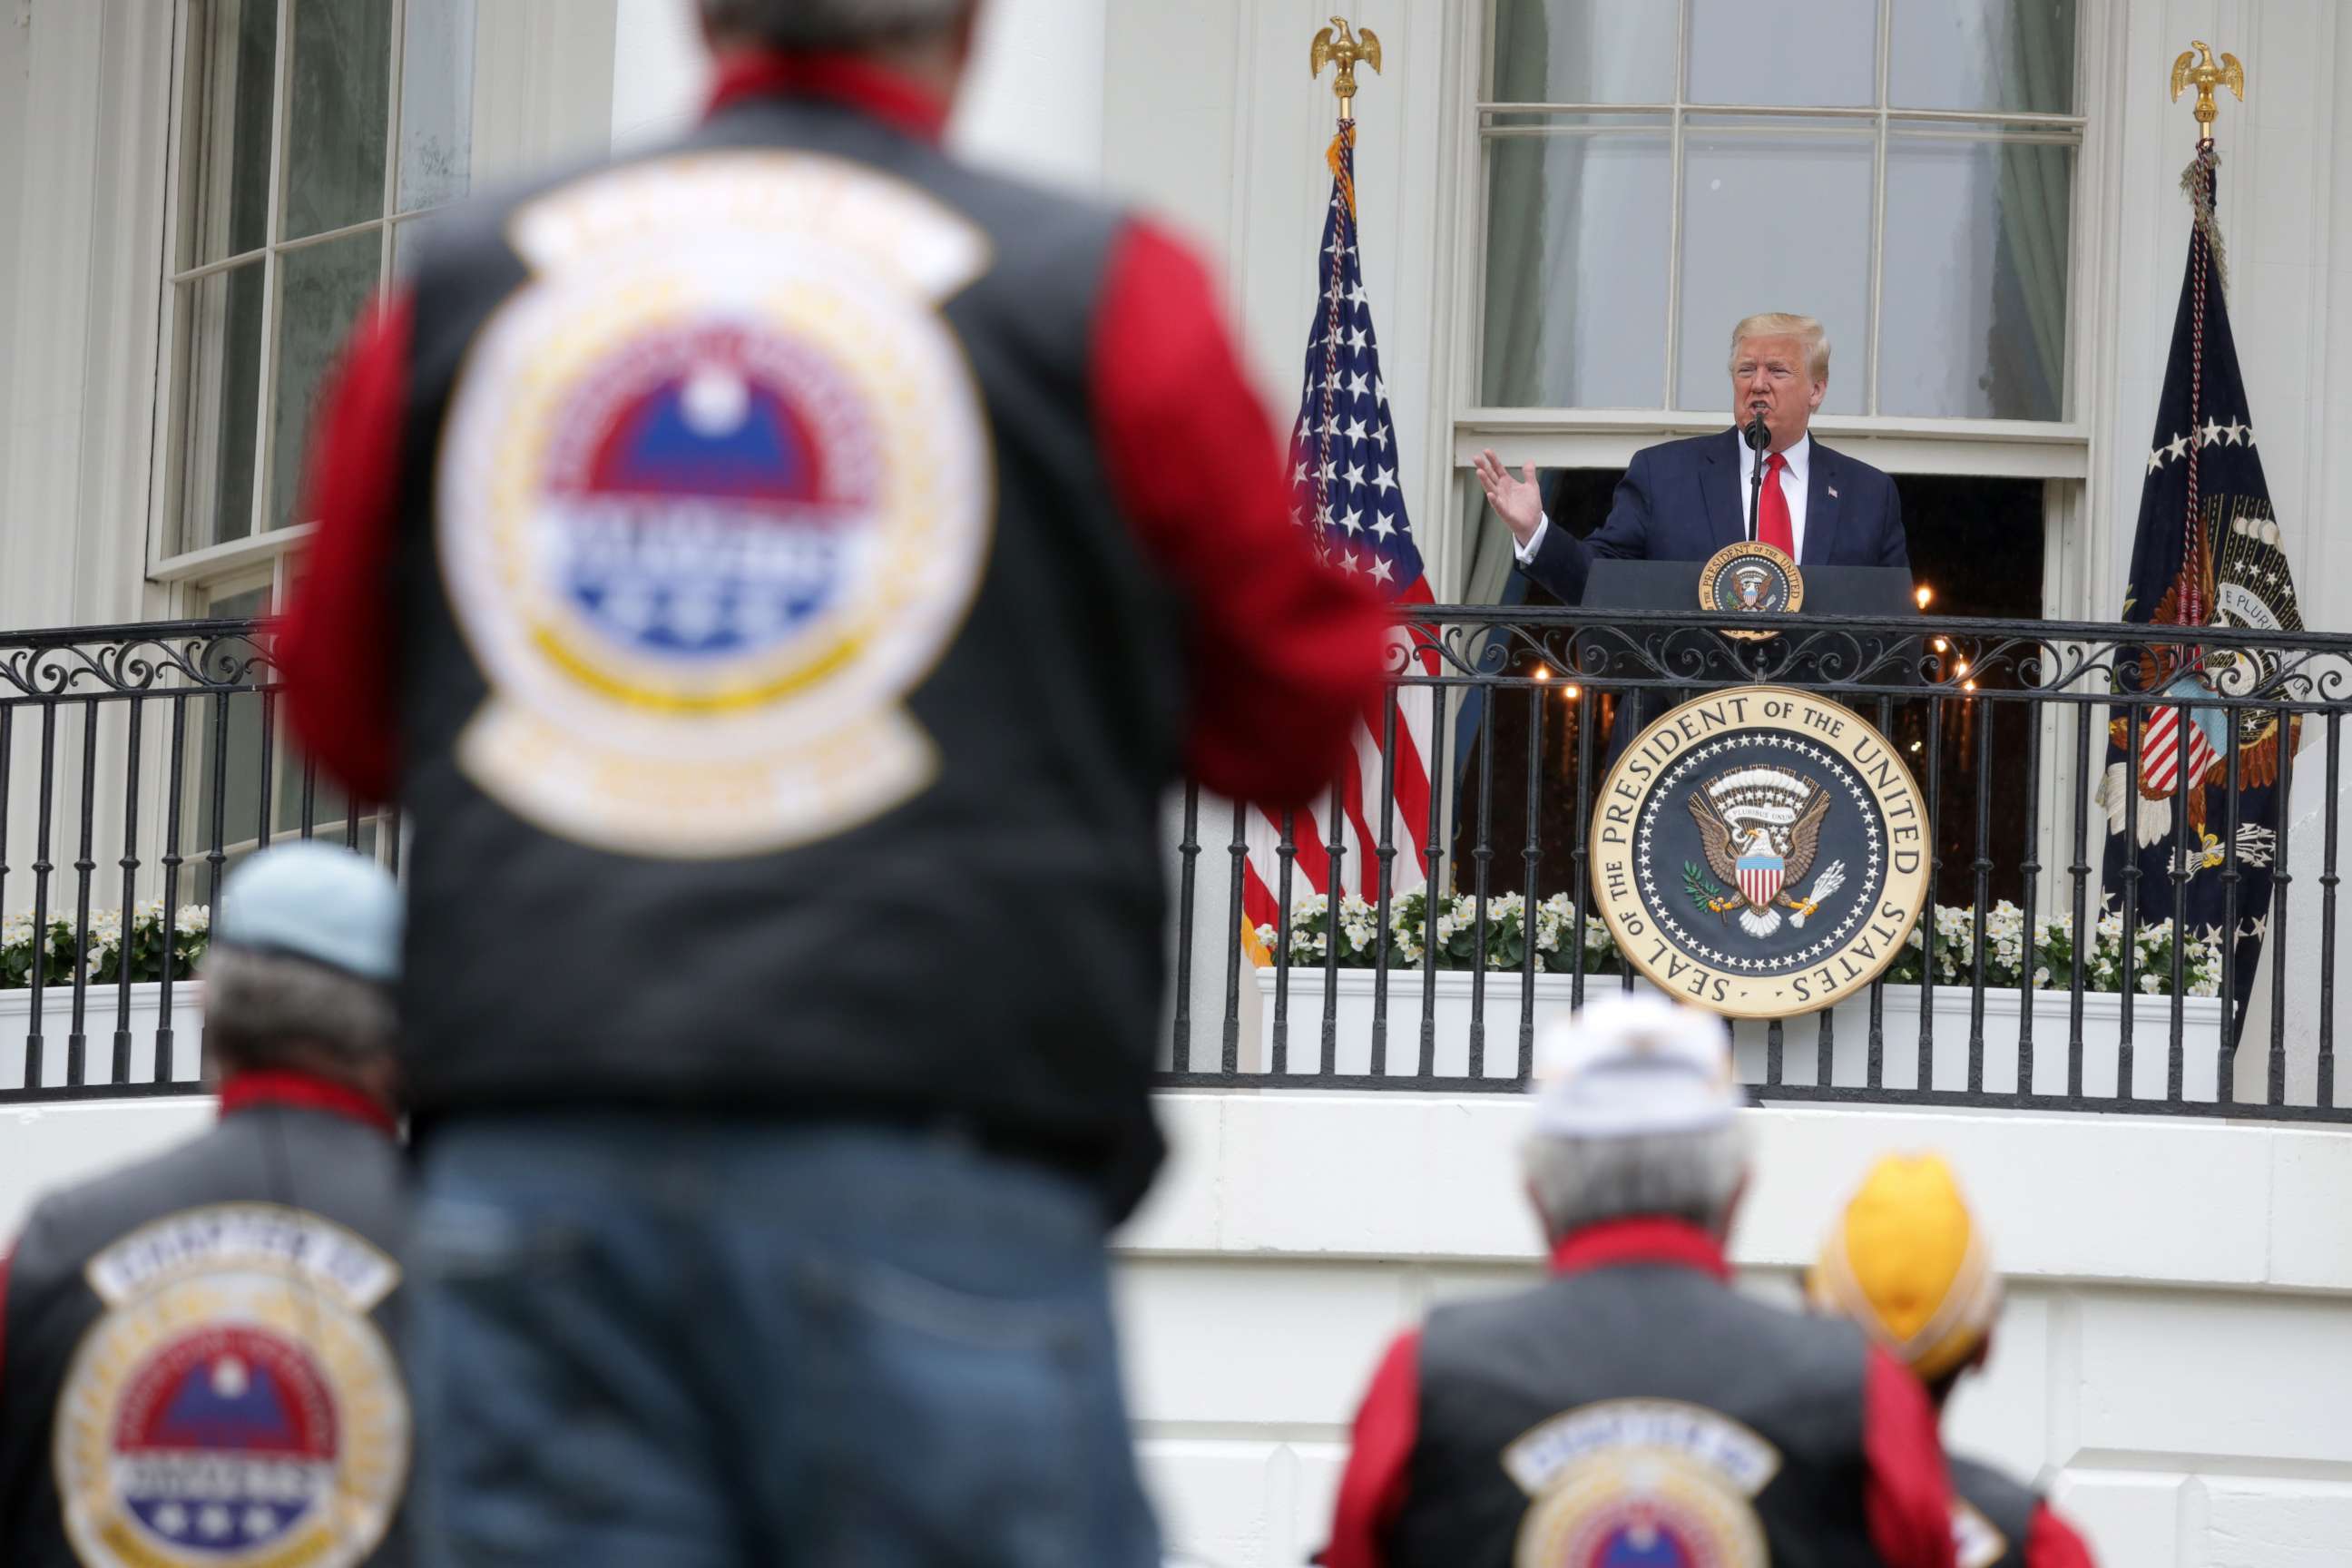 PHOTO: President Donald Trump speaks from the Truman Balcony during a ceremony to honor veterans at the White House May 22, 2020, in Washington.